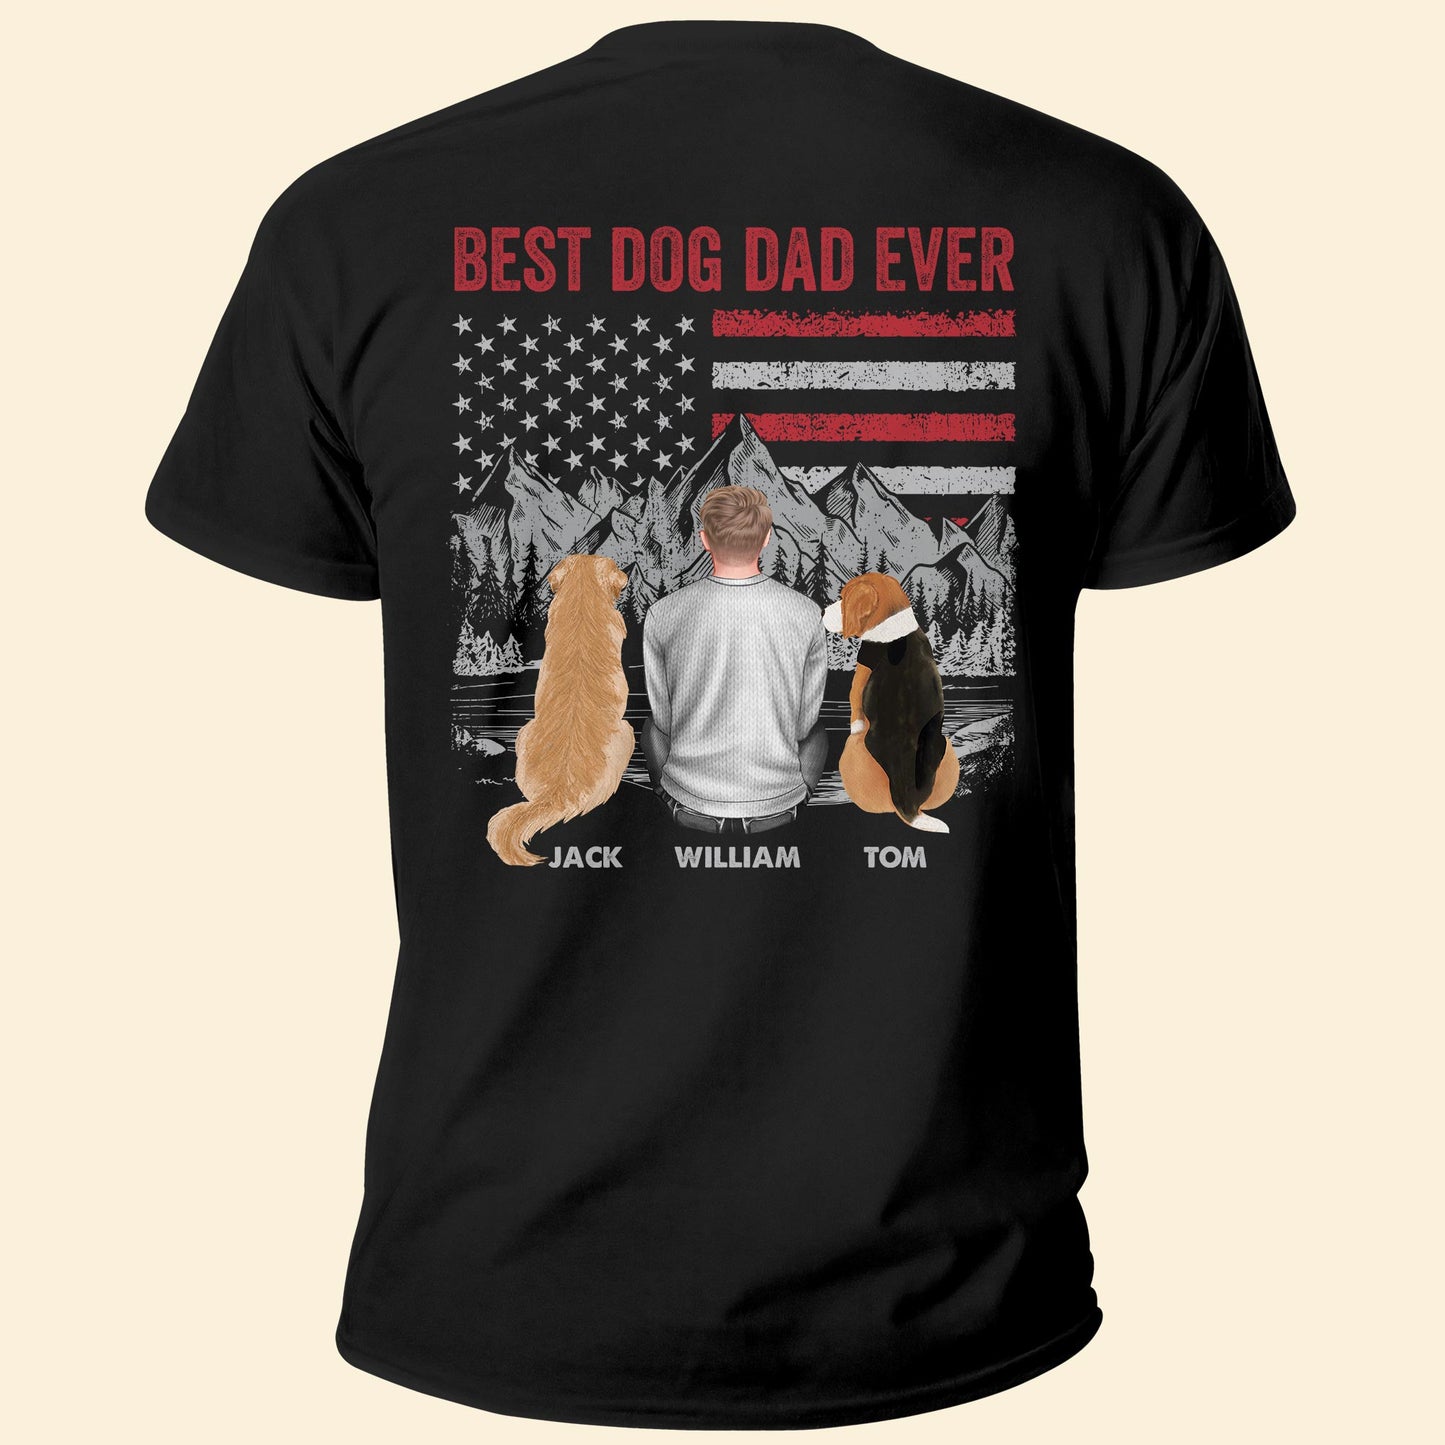 Best Dog Dad Ever - Personalized Shirt